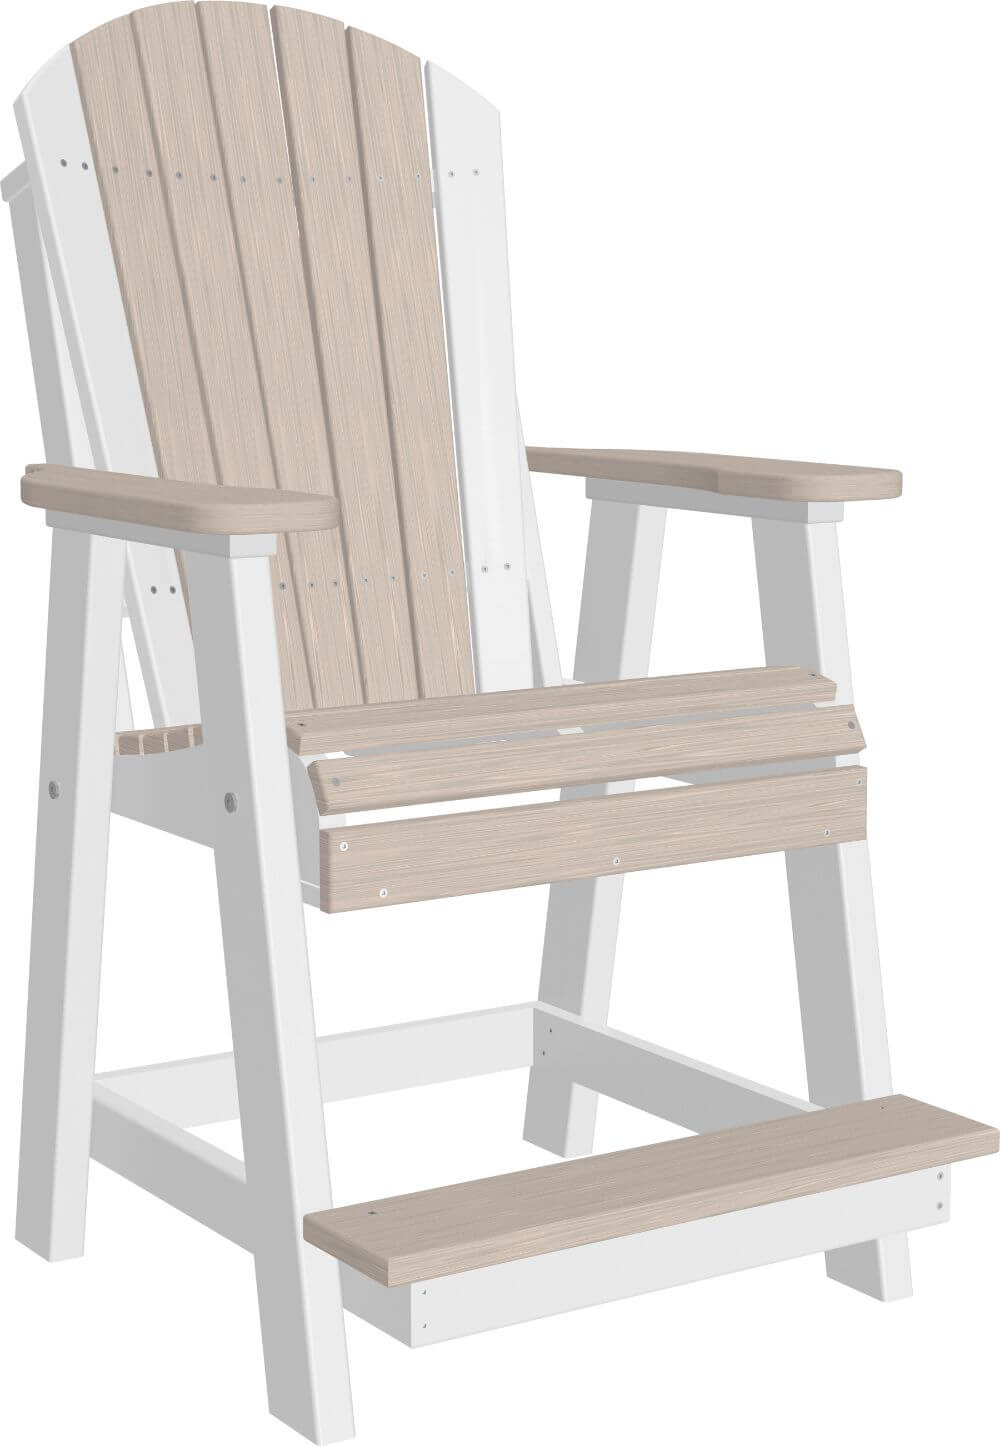 Luxcraft Amish Poly Adirondack Balcony Chair & Table Set - Counter Height